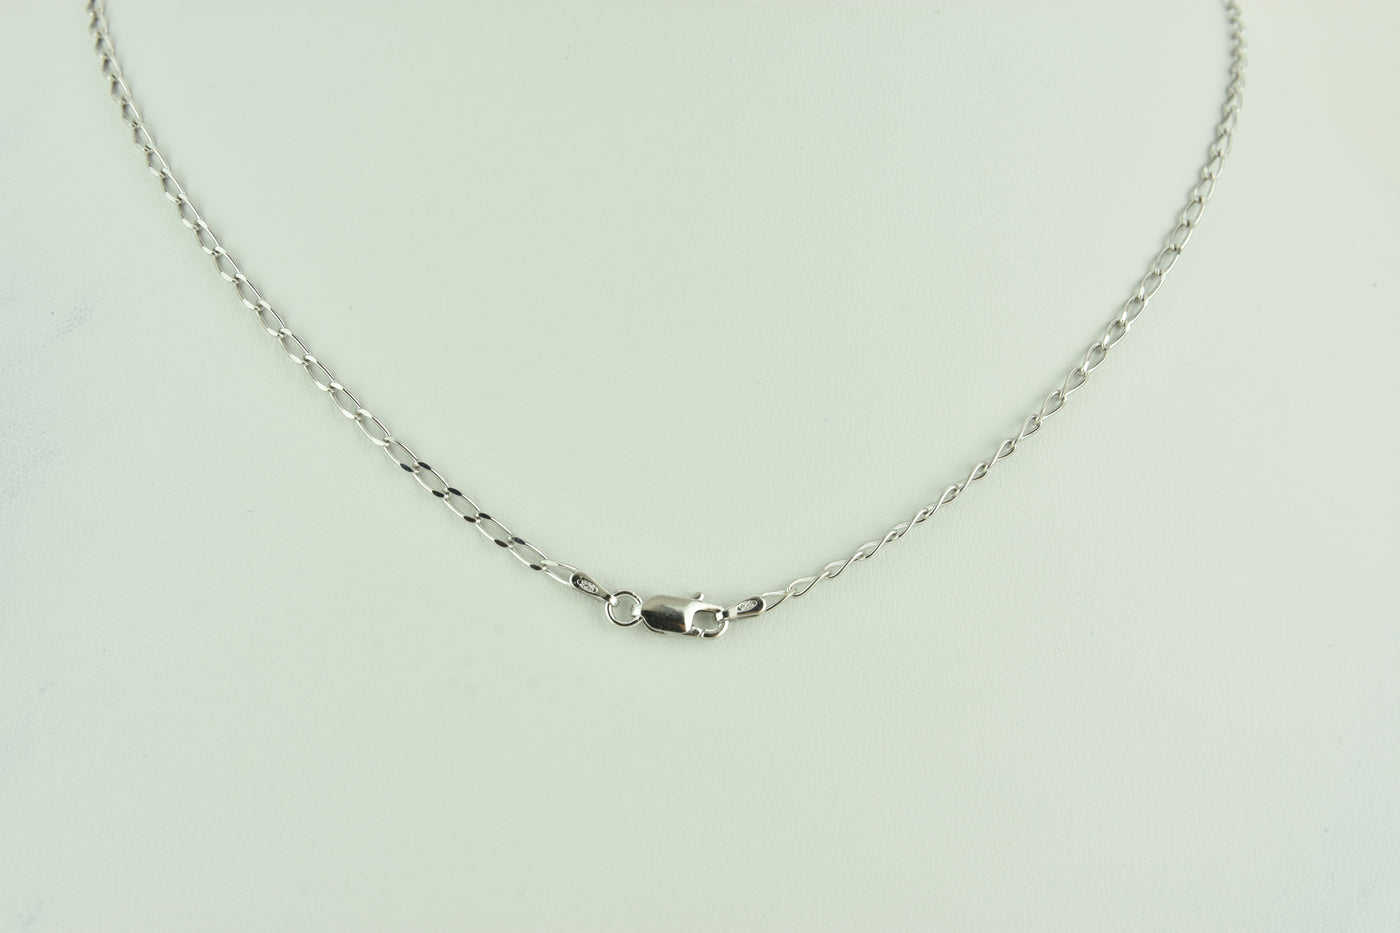 Mini Open Link Sterling Silver Chain with White Rhodium plate